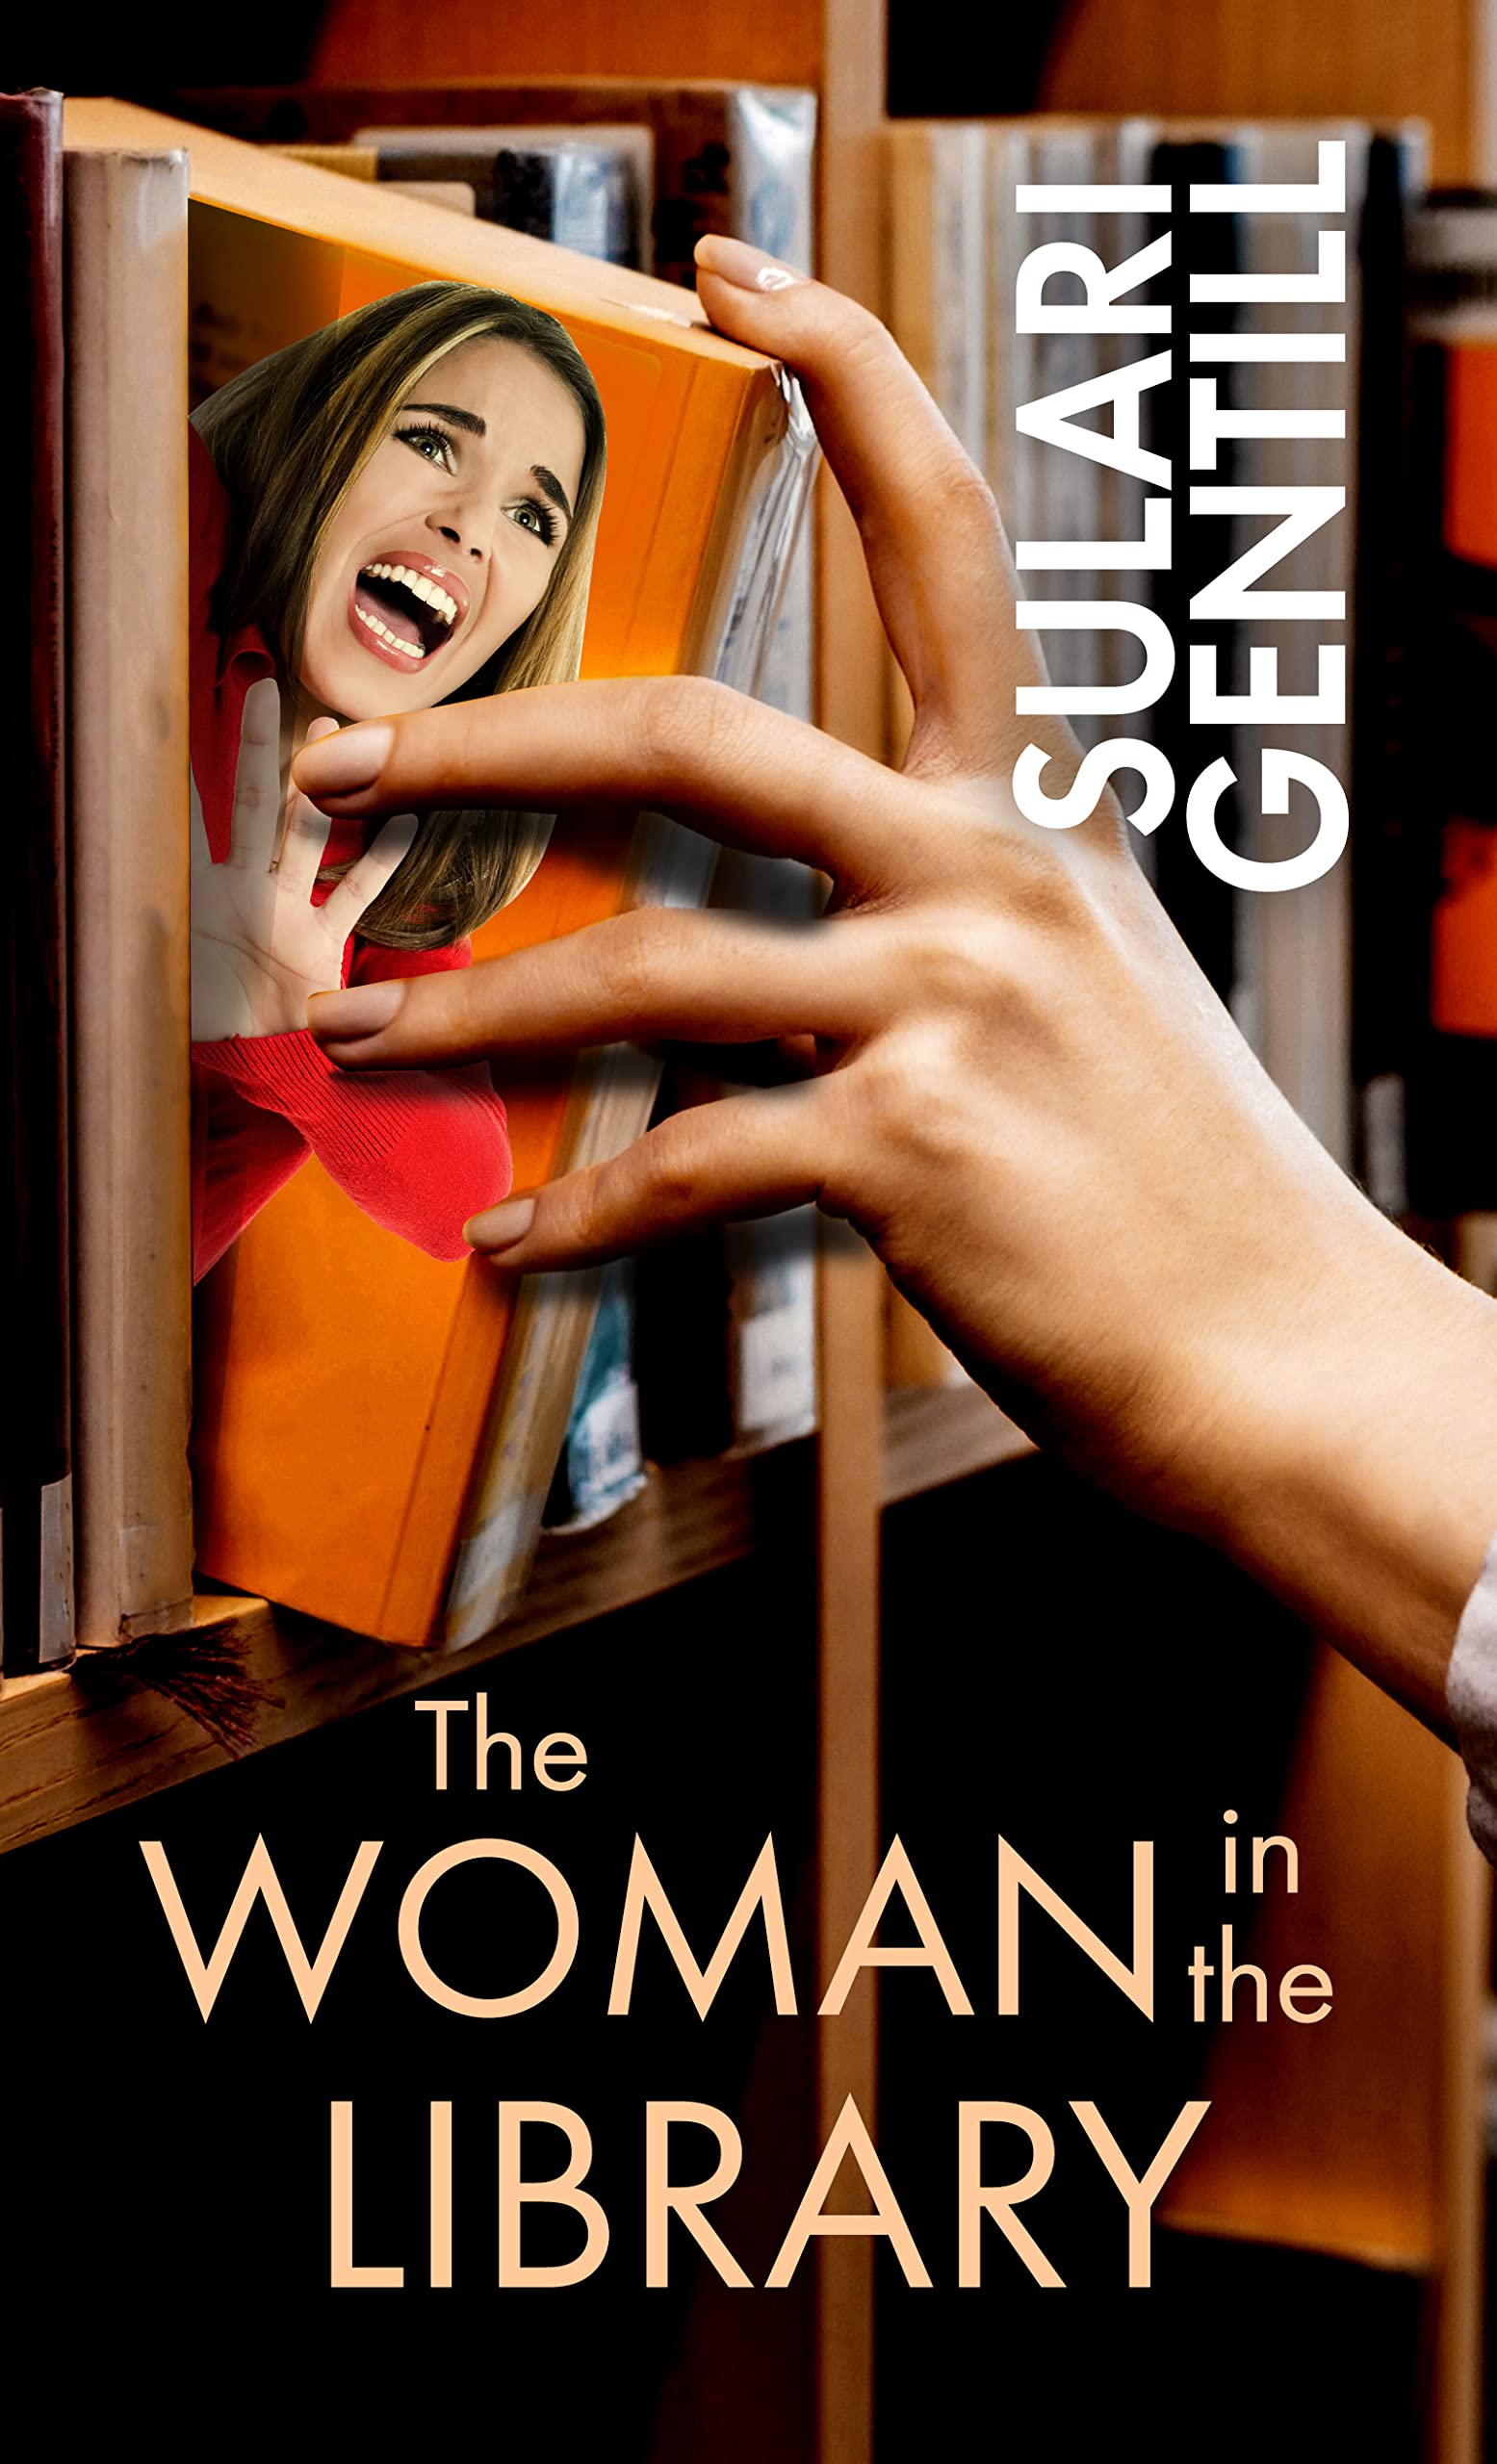 The Woman in the Library book cover